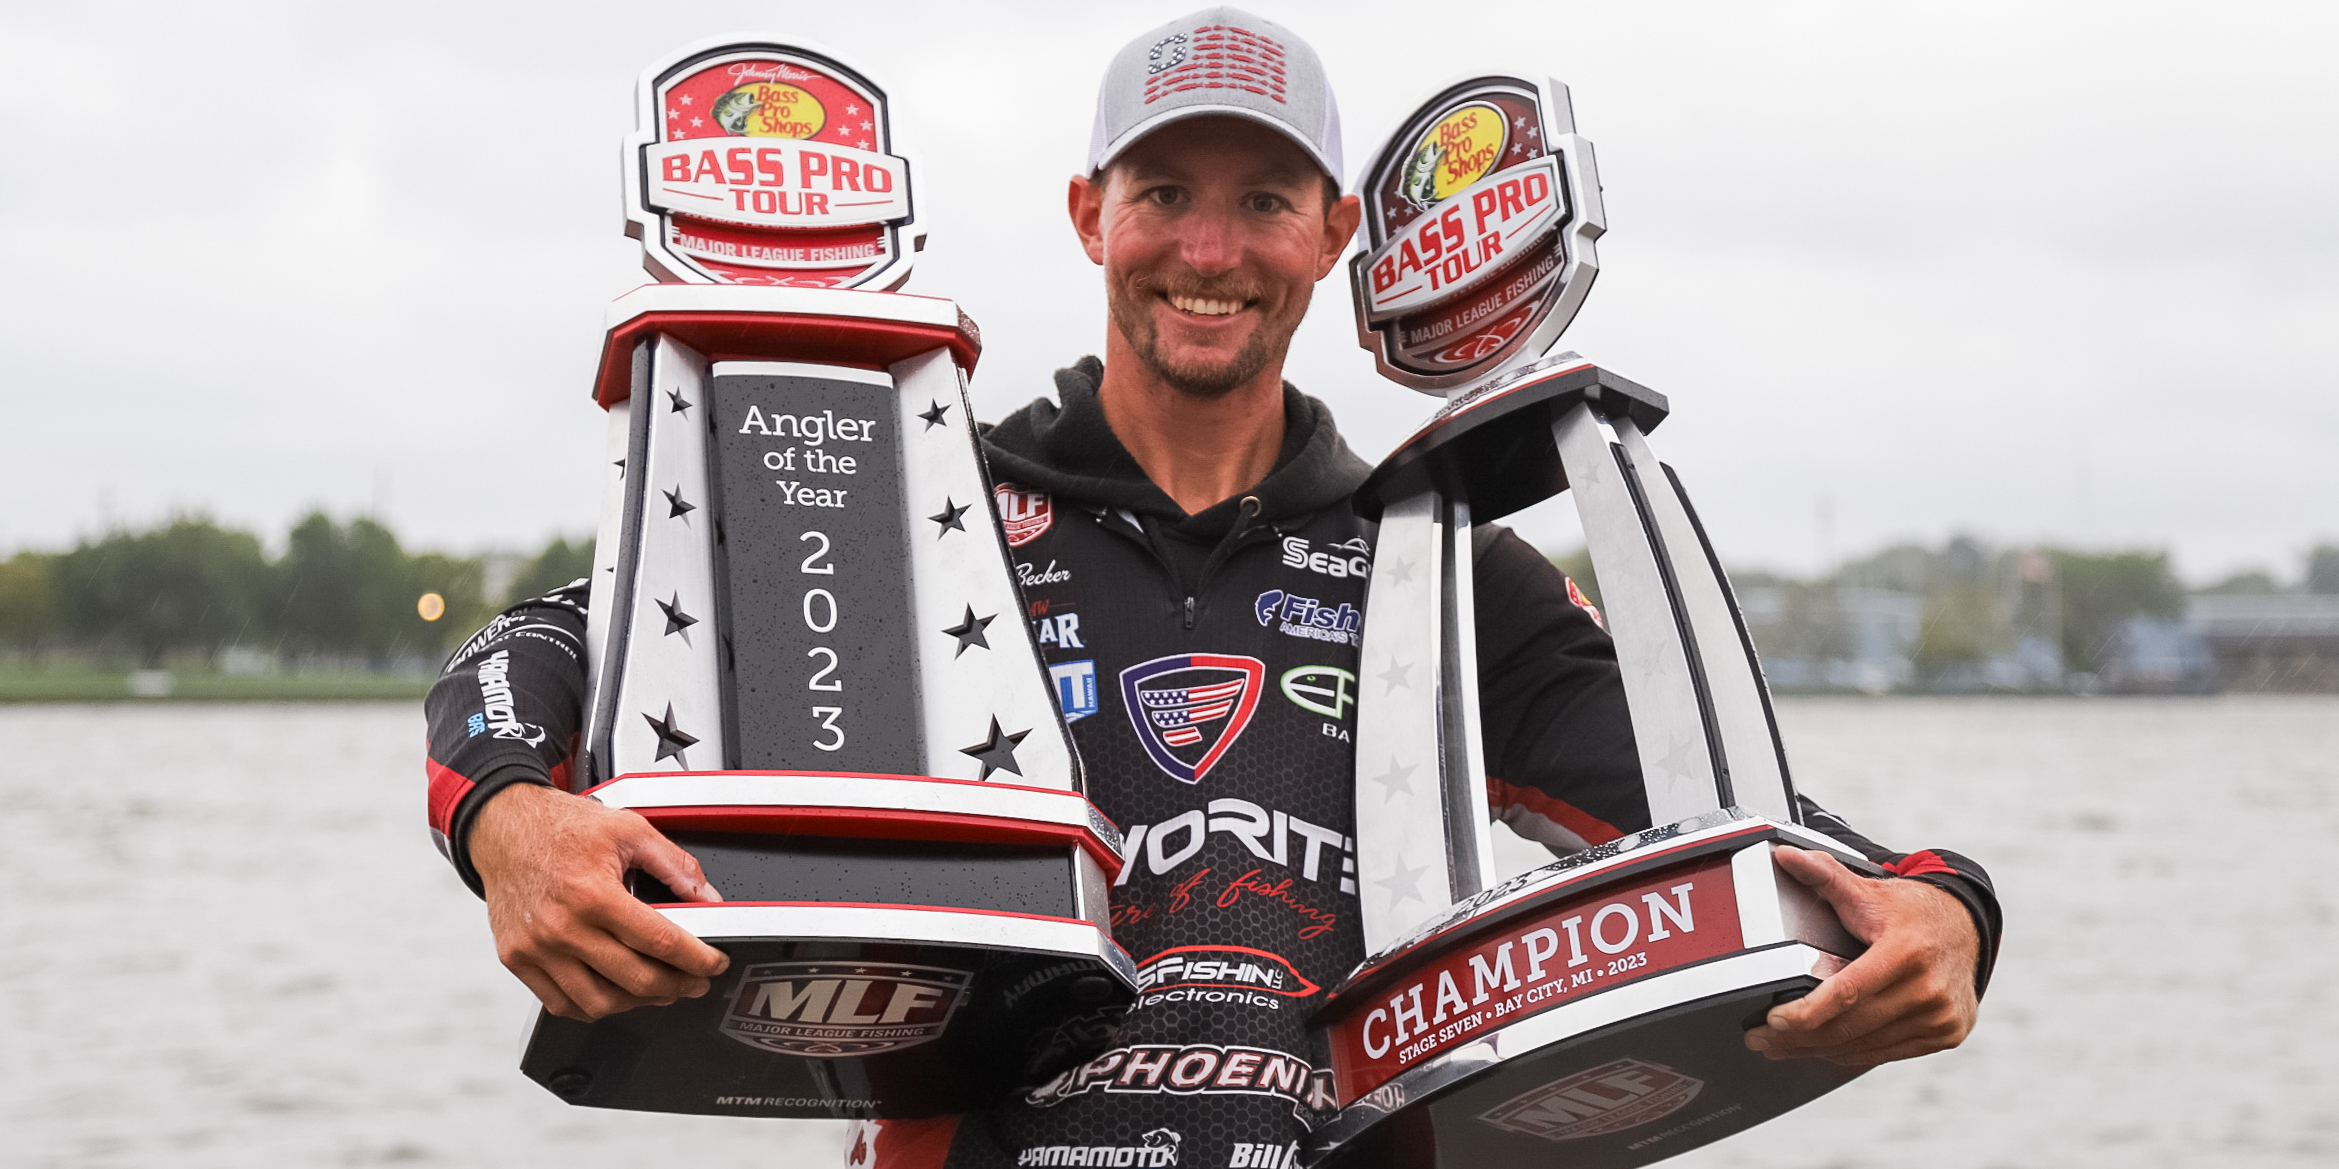 Rookie Matt Becker clinches first Bass Pro Tour win and Angler of the Year  at Minn Kota Stage Seven at Saginaw Bay Presented by Suzuki - Major League  Fishing